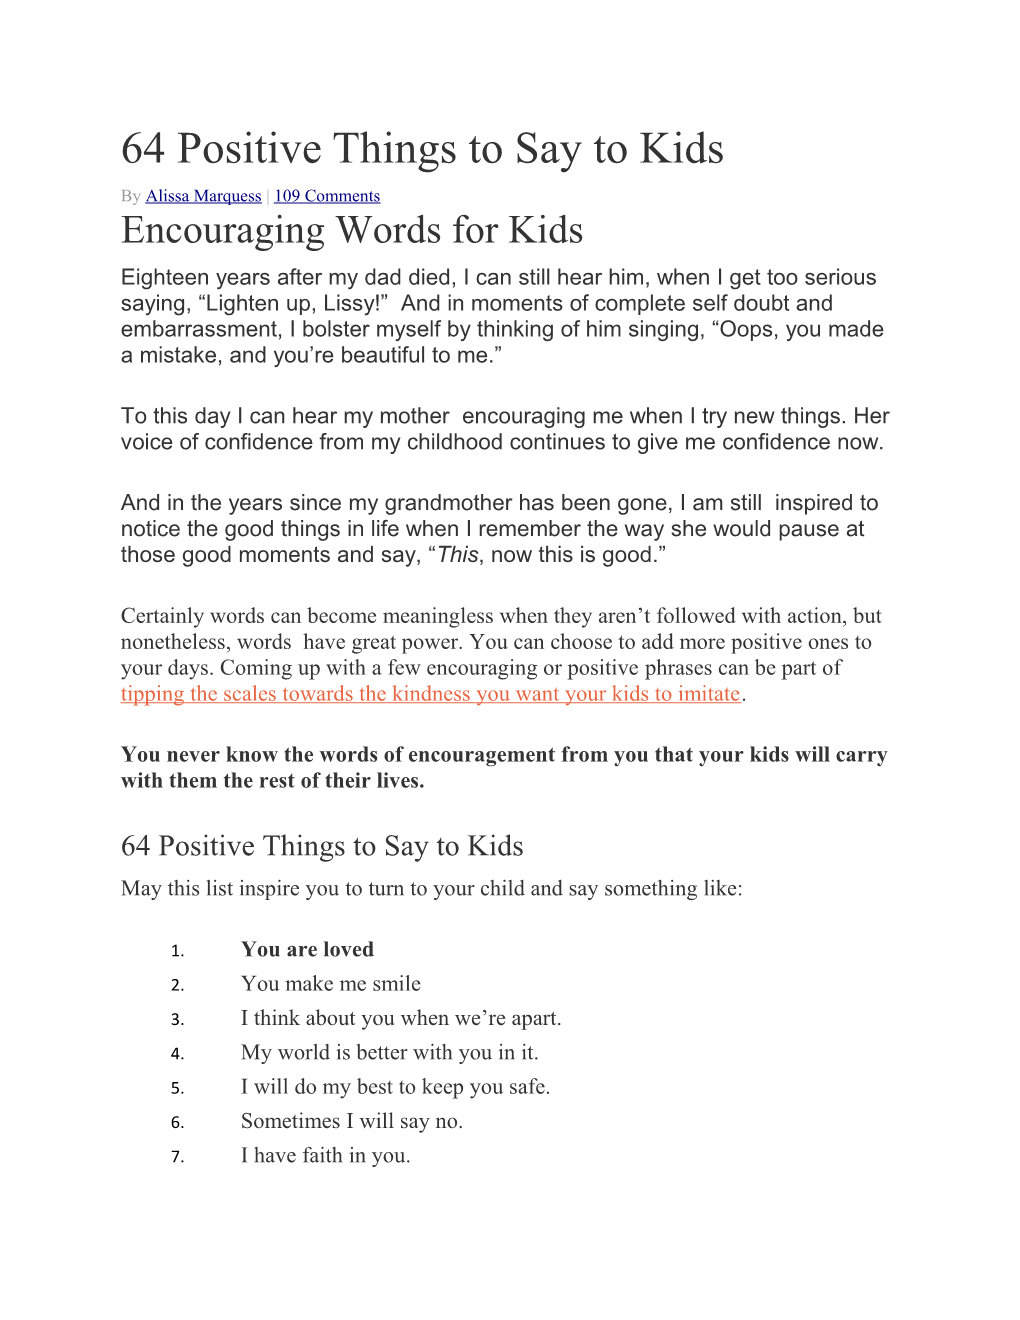 64 Positive Things to Say to Kids